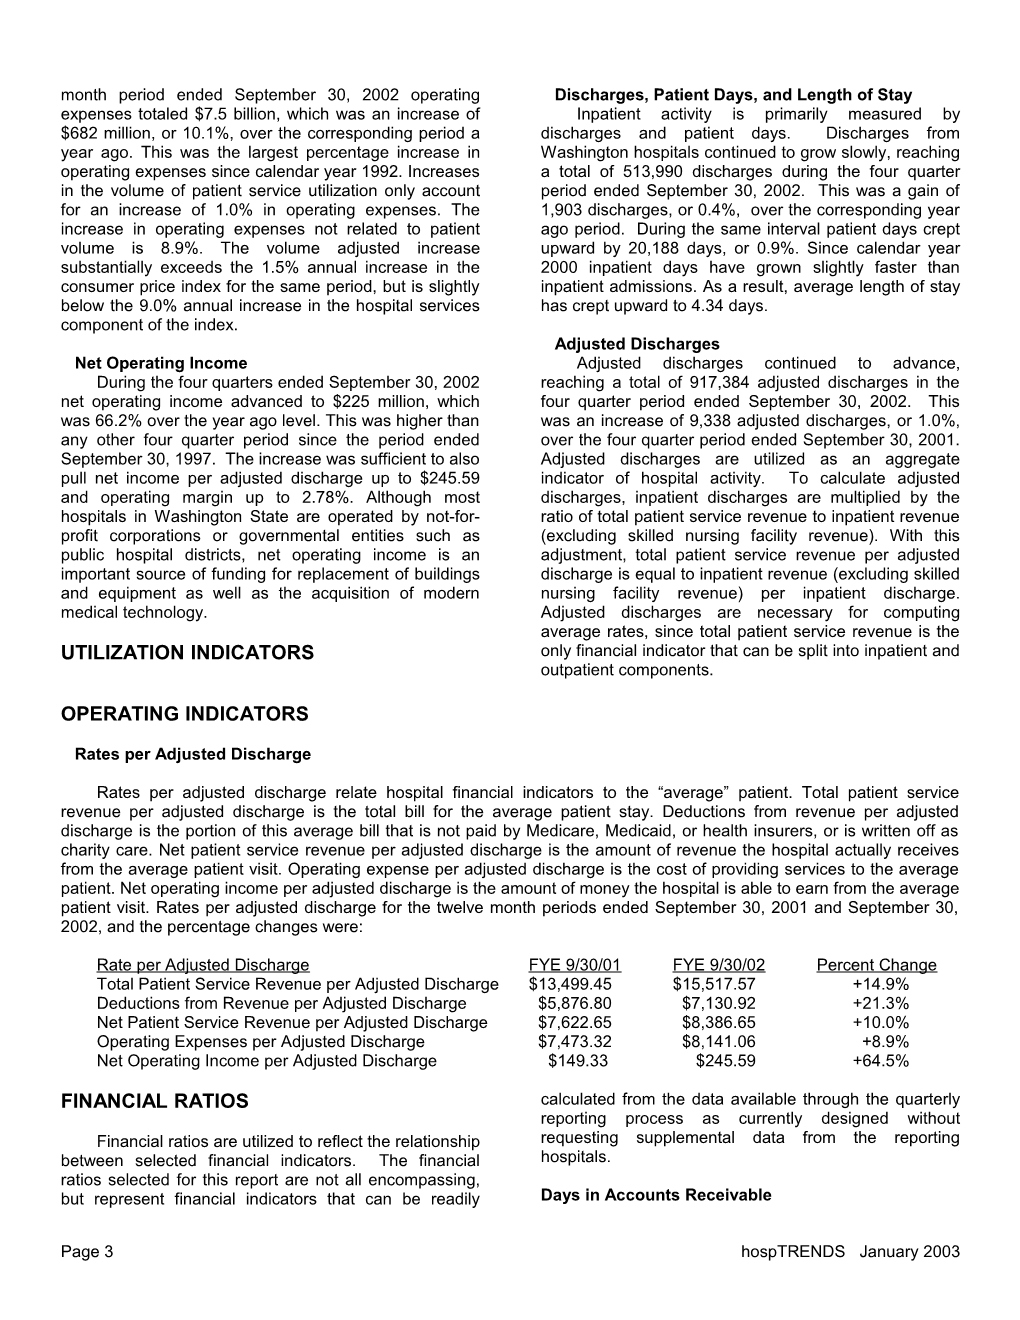 Page 1 Hosptrends January 2003